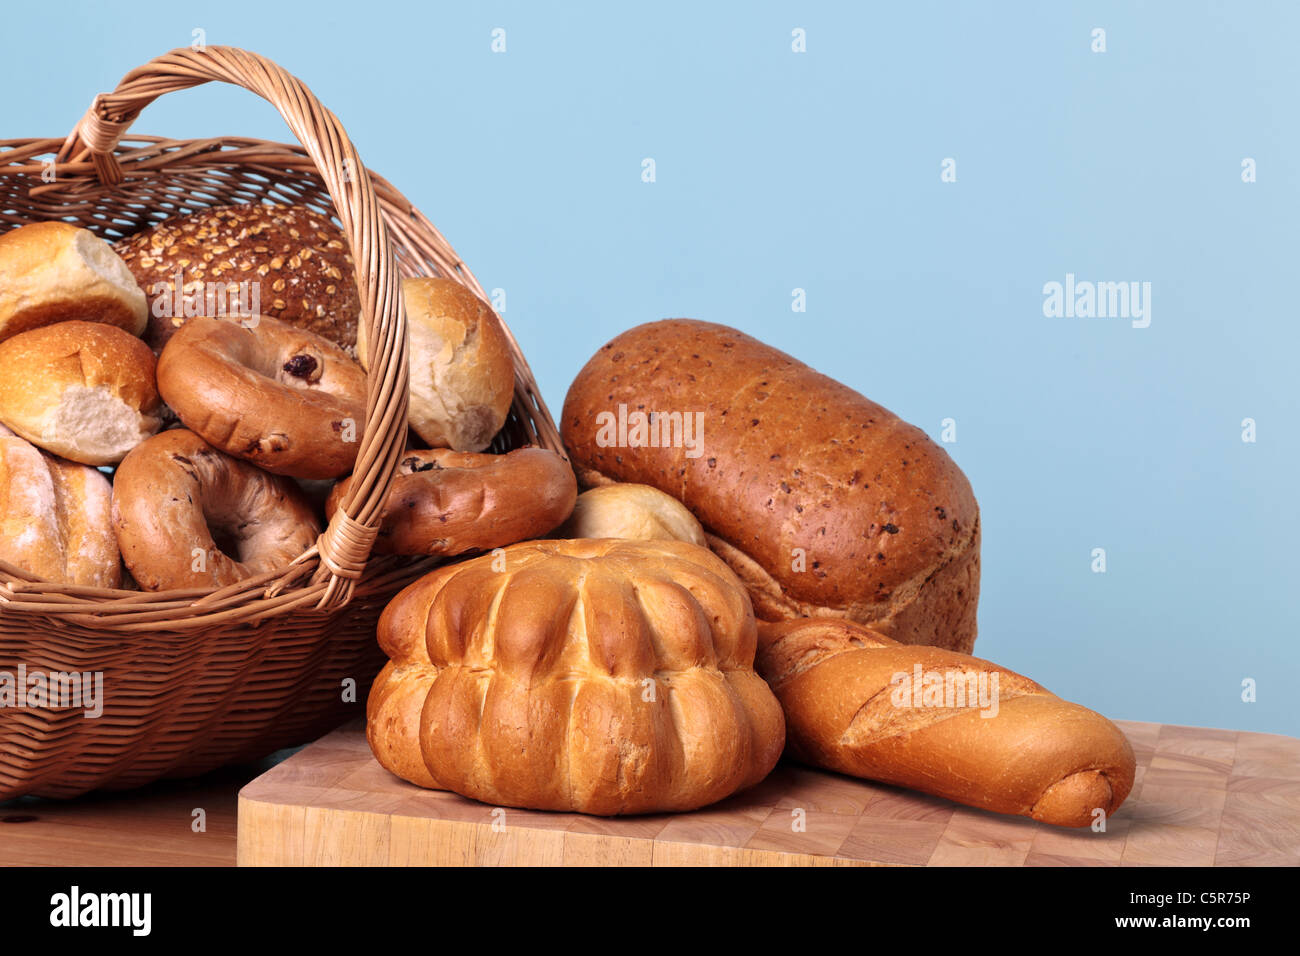 Photo of different types of bread spilling out from a basket. Stock Photo